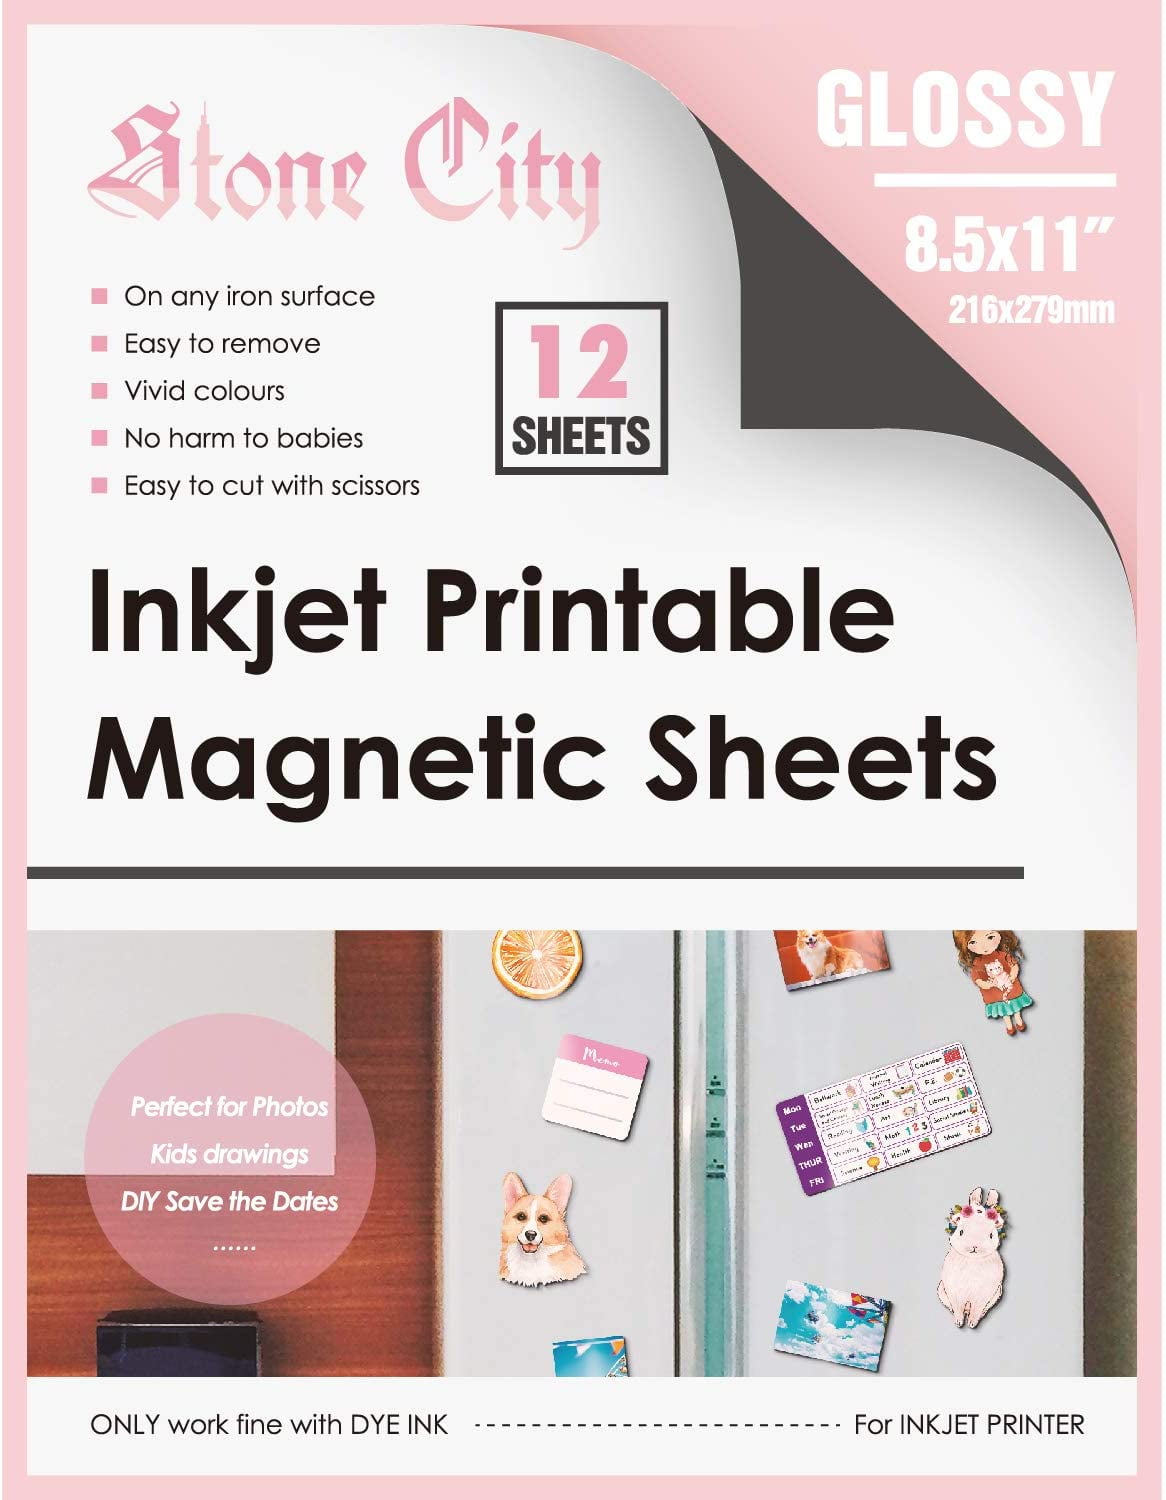 Stone City Printable Magnetic Sheets Glossy Magnet Photo Paper 8.5x11 12  Sheets for Inkjet Printers, Work with Laser and Cricut, 12Mil DIY Signs,  Die-cuts, Crafts 